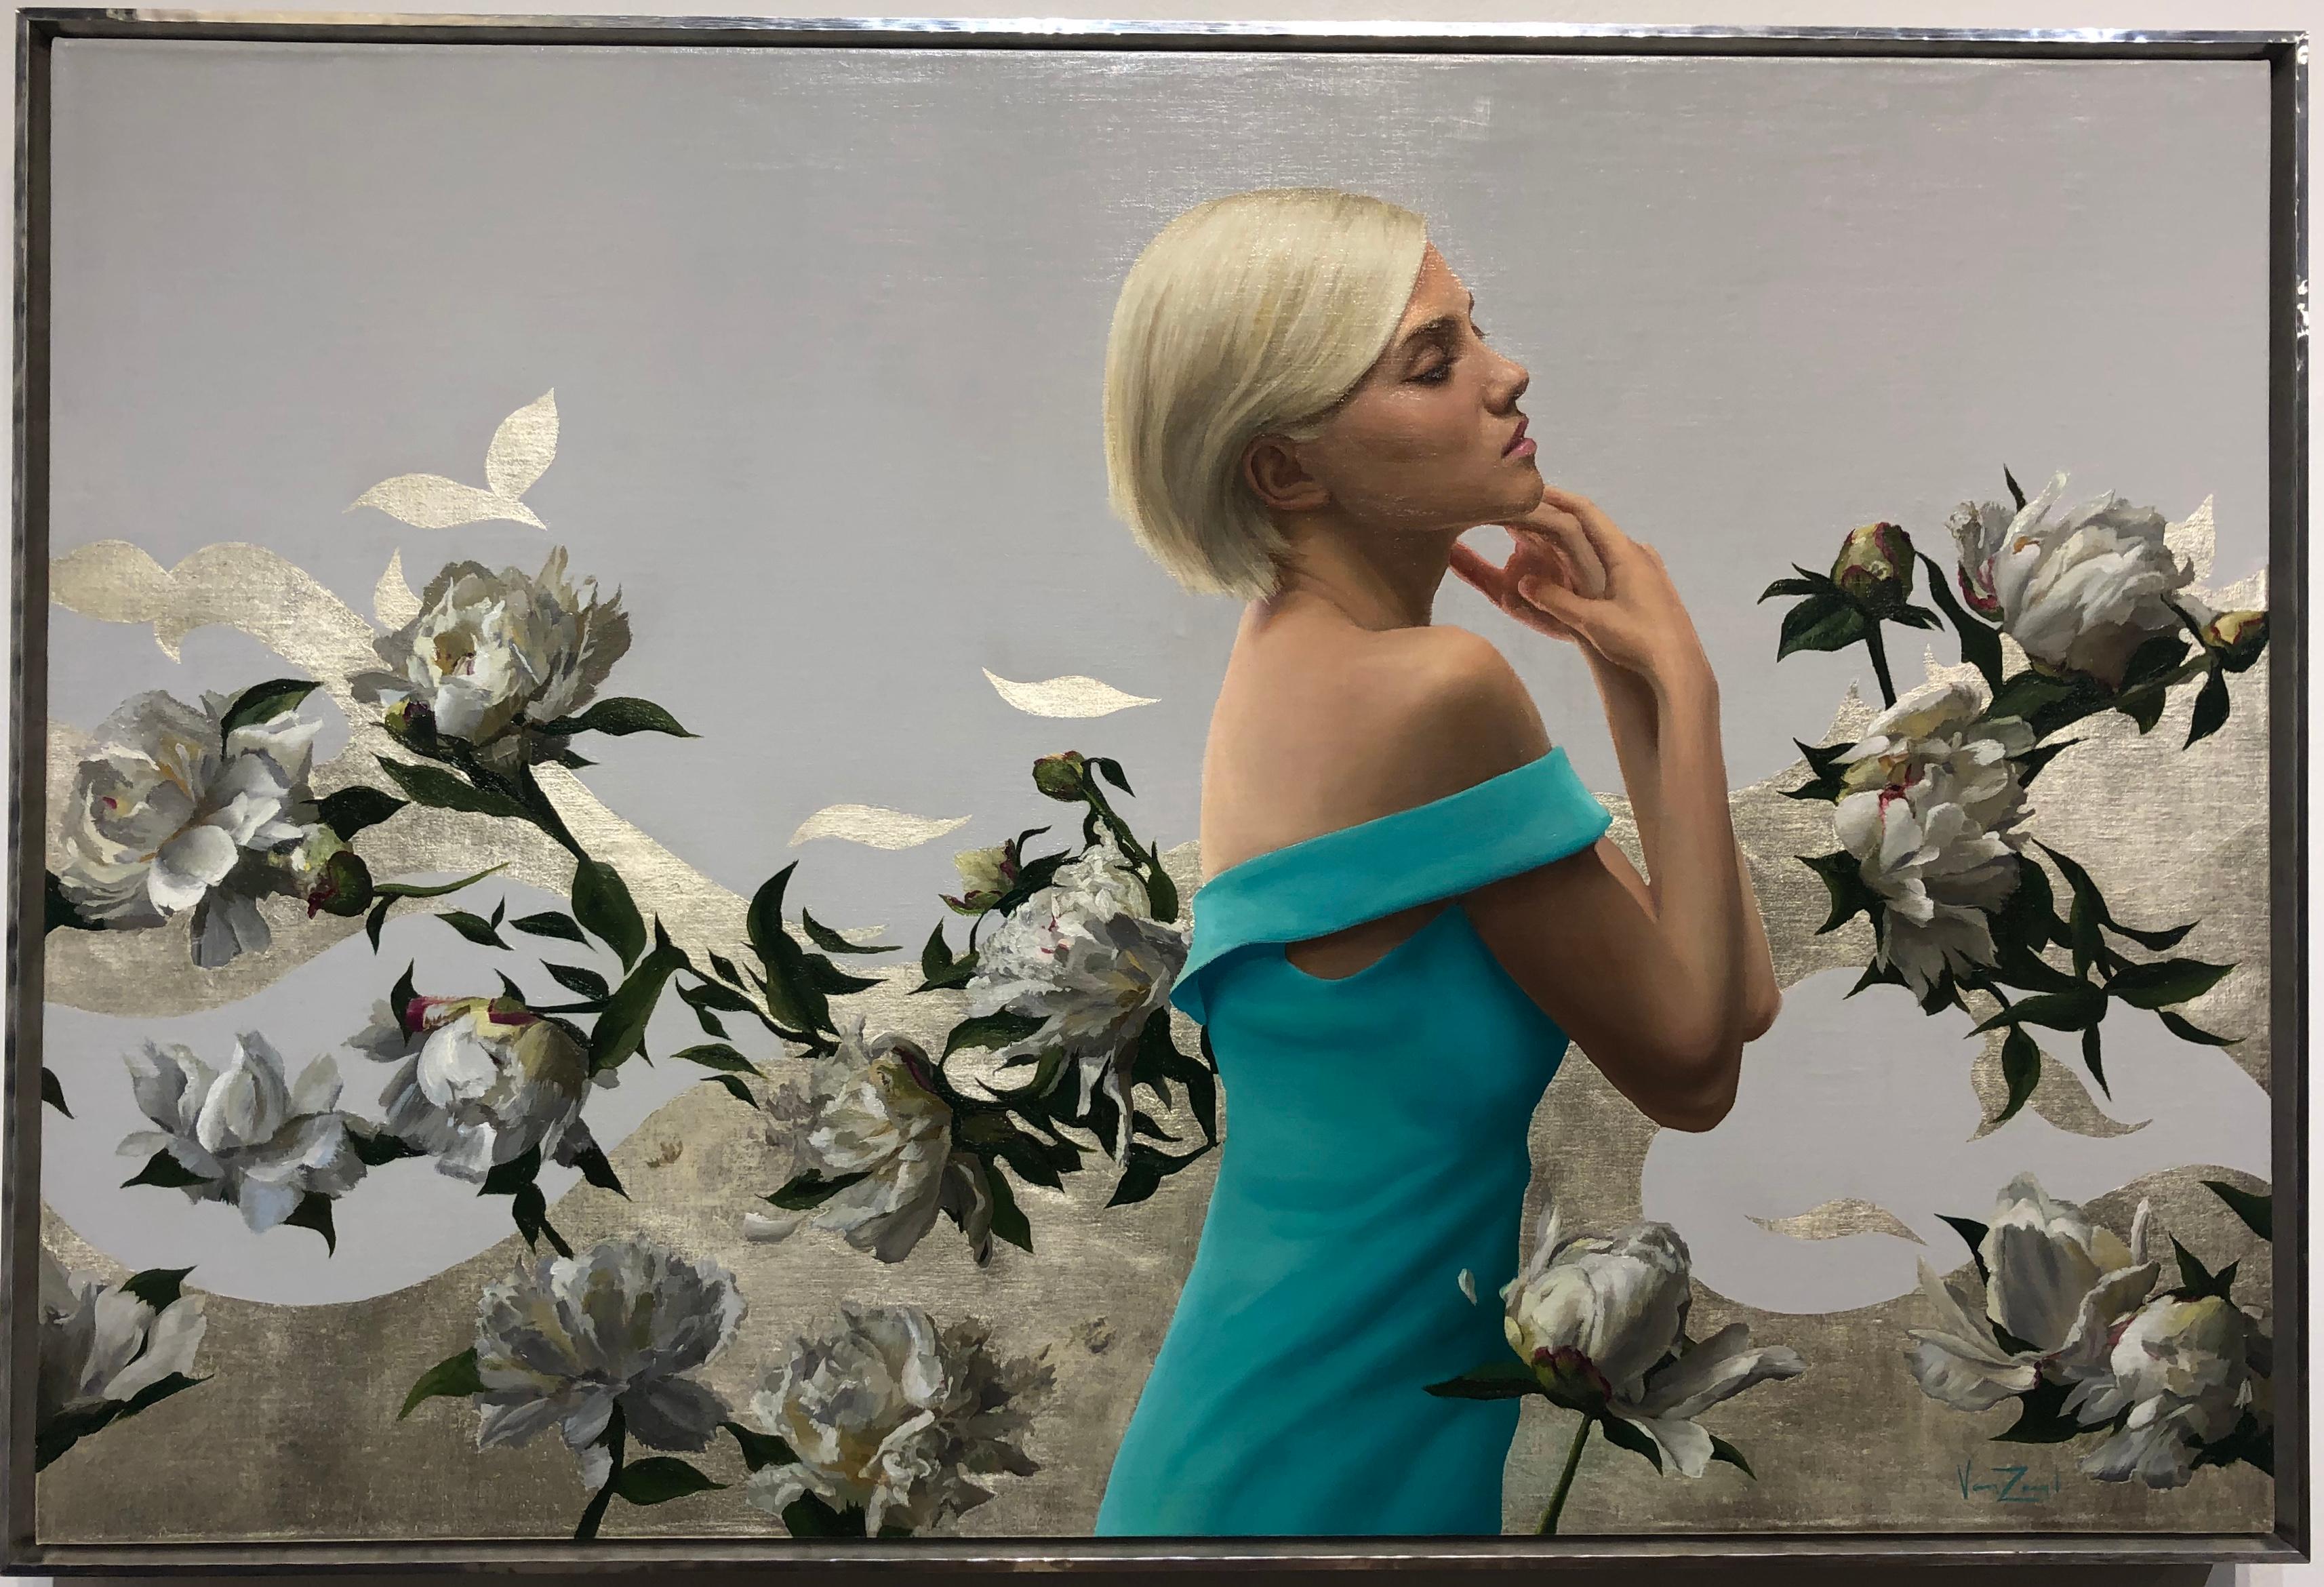 The blond figure, along with the floating peonies, combine to explore the dynamic between the eternal and the temporal, as well as our own relationship with nature.  The gold leaf adds a three-dimensional softness as well as a glow upon which the